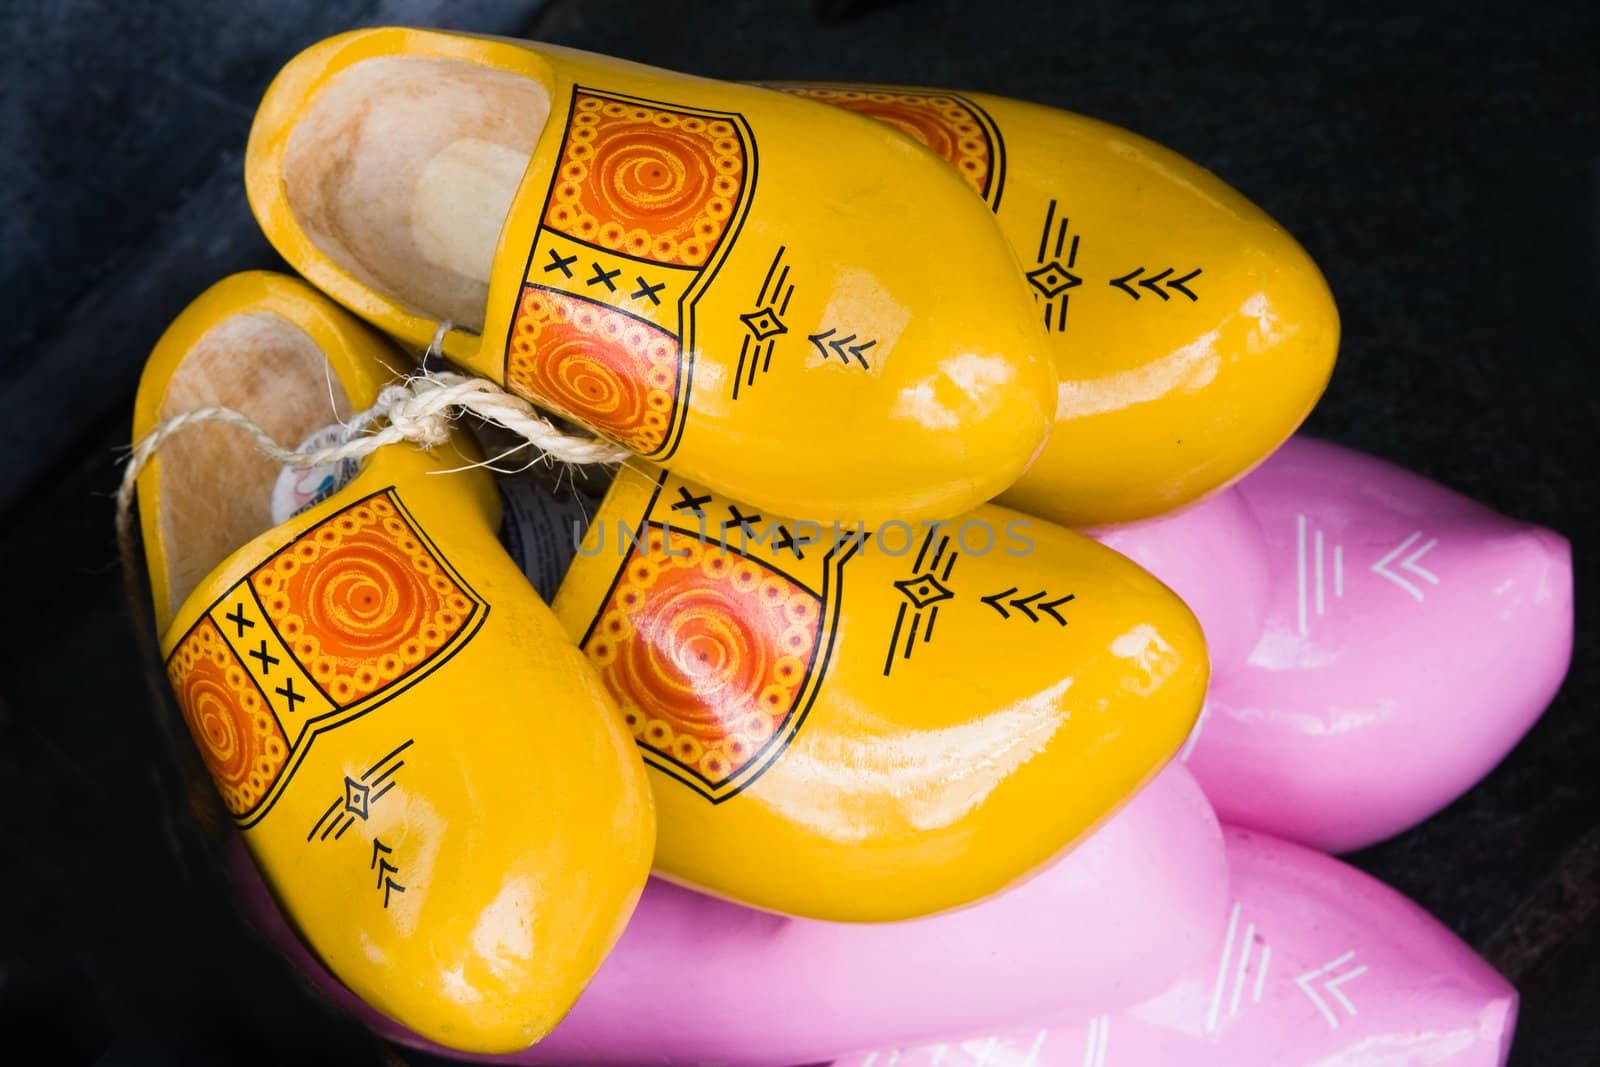 Dutch wooden shoes in different colors and sizes for sale as a souvenir